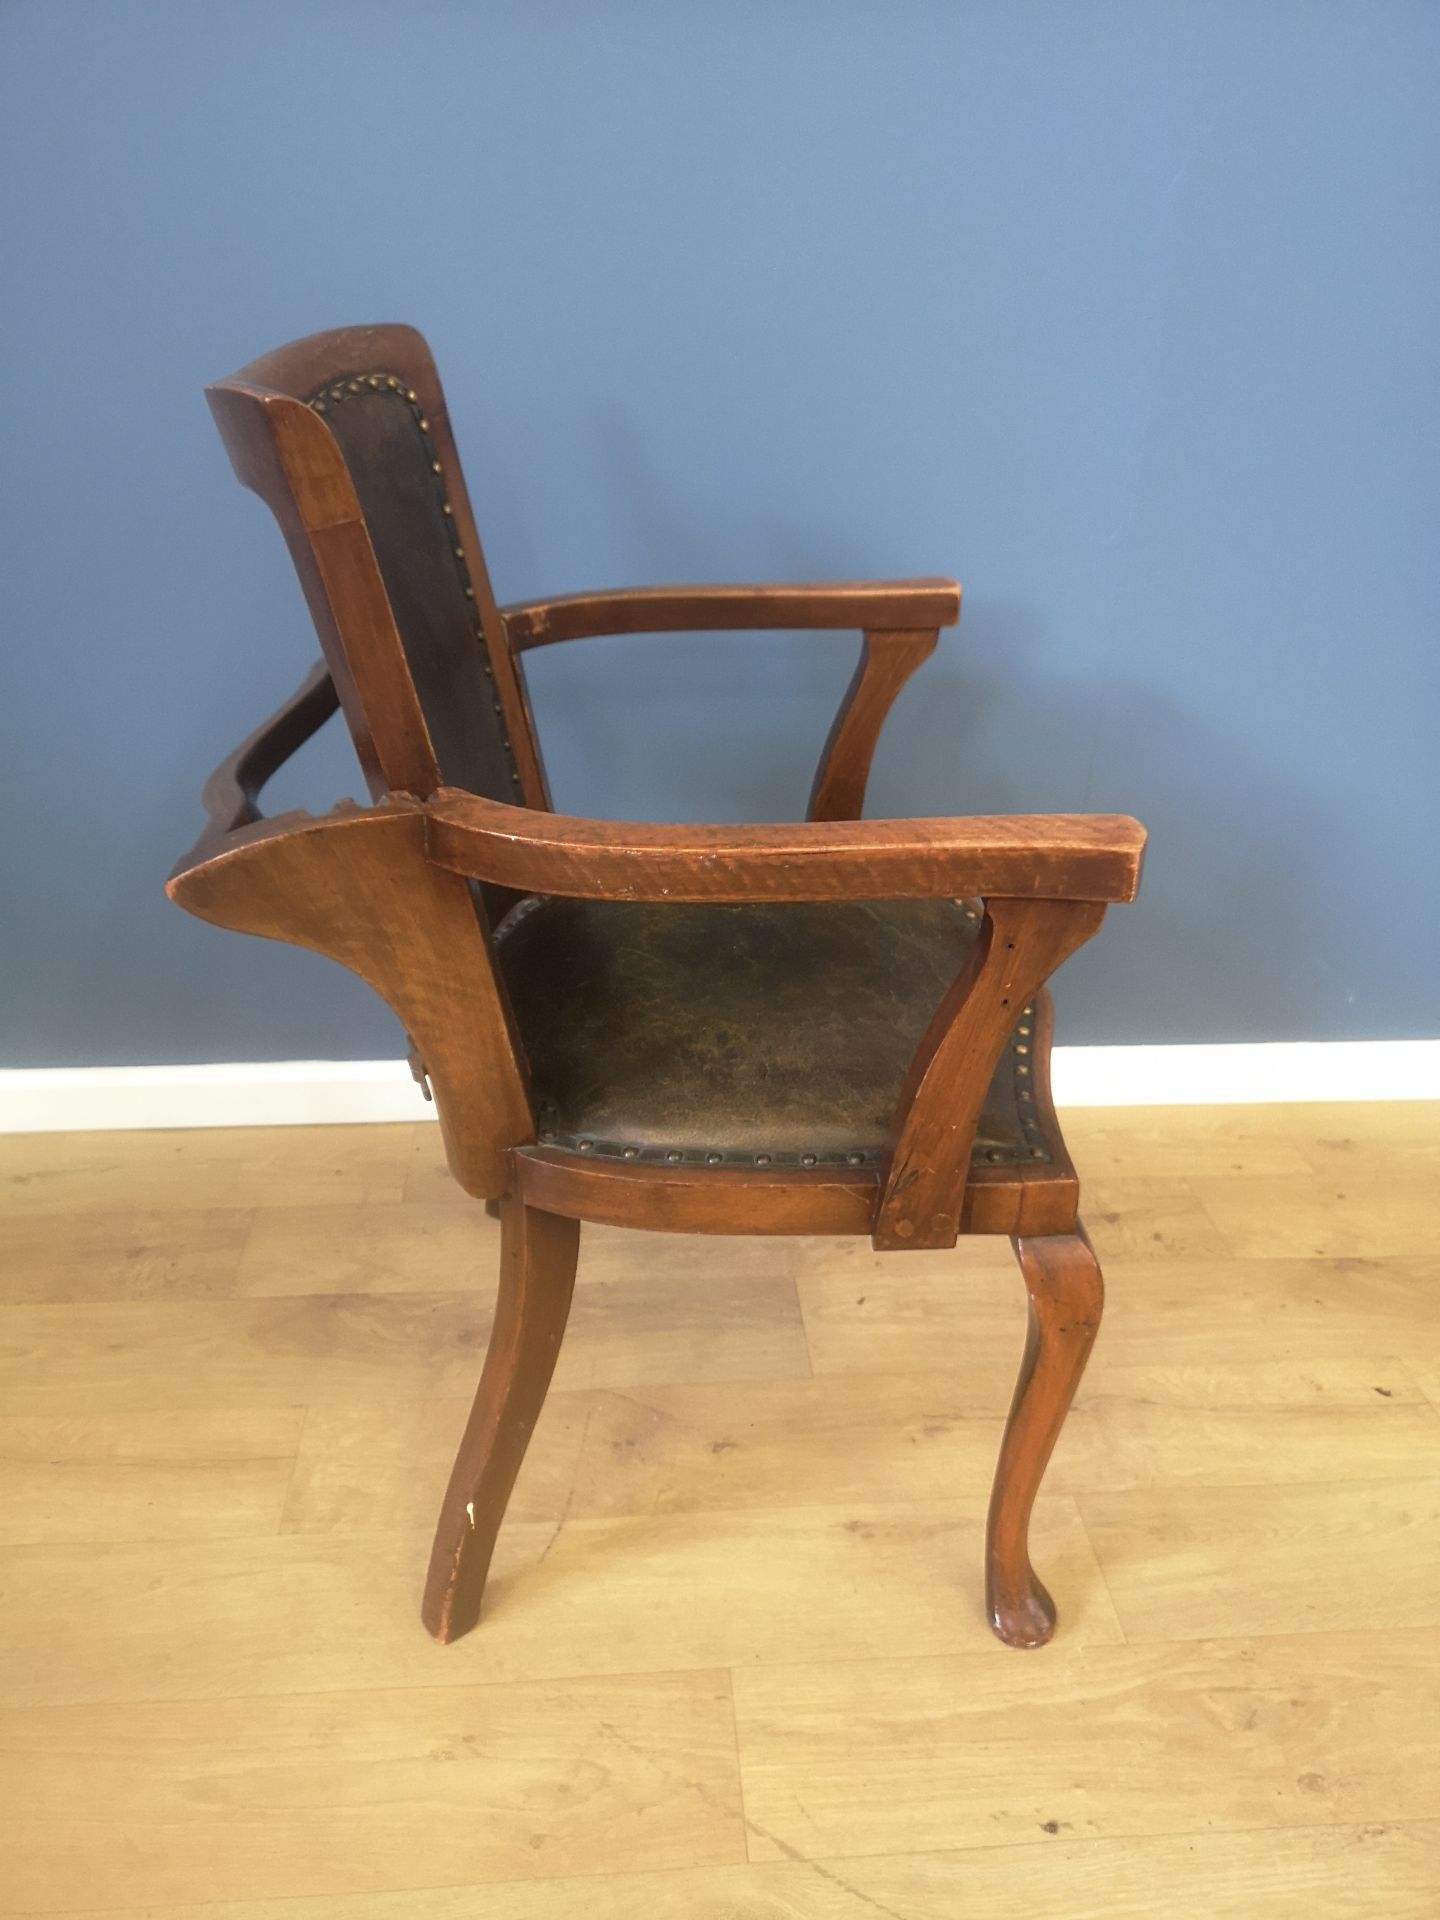 Mahogany chair with adjustable back - Image 4 of 5